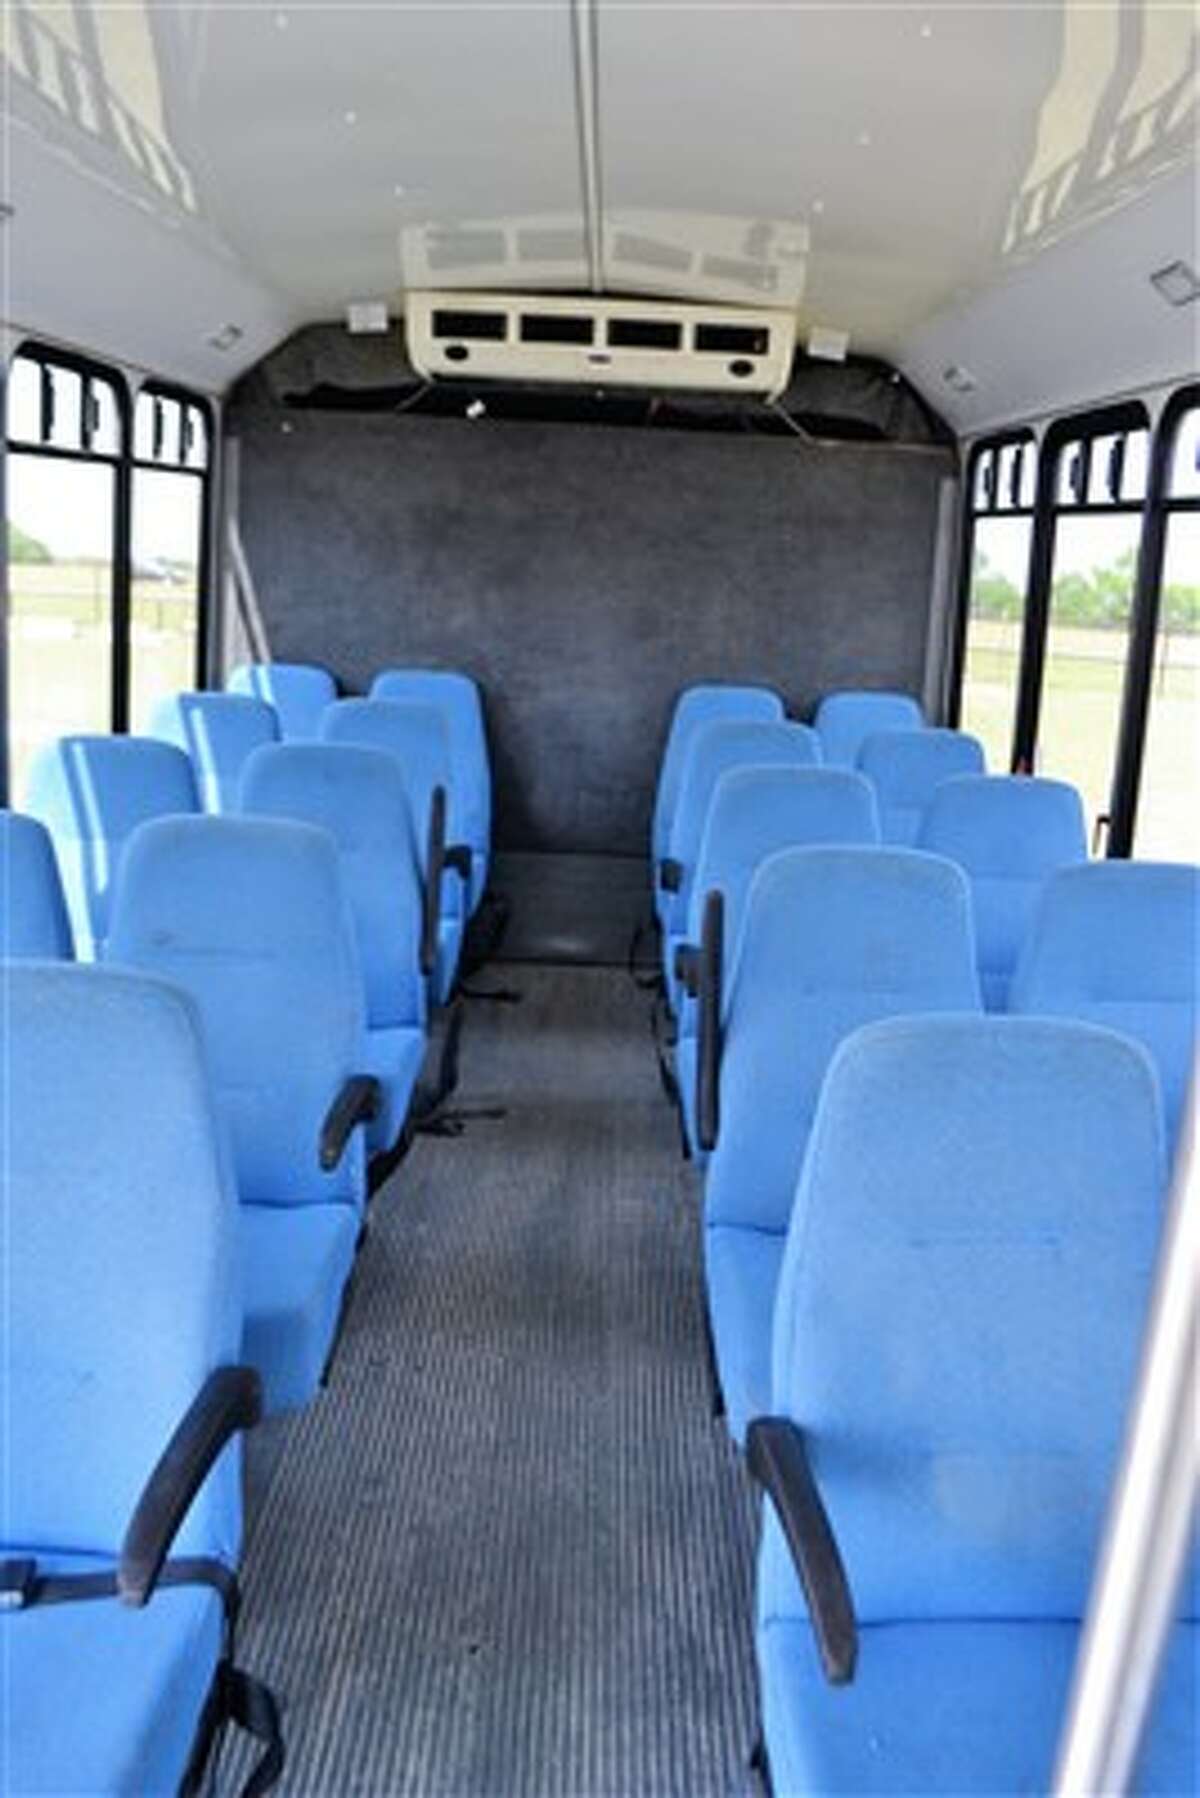 Former airport shuttle buses recently seized from a San Antonio company by Bexar County go on the auction block Wednesday, May 9, 2018. The opening price for each of the vehicles has been set at $1,000.